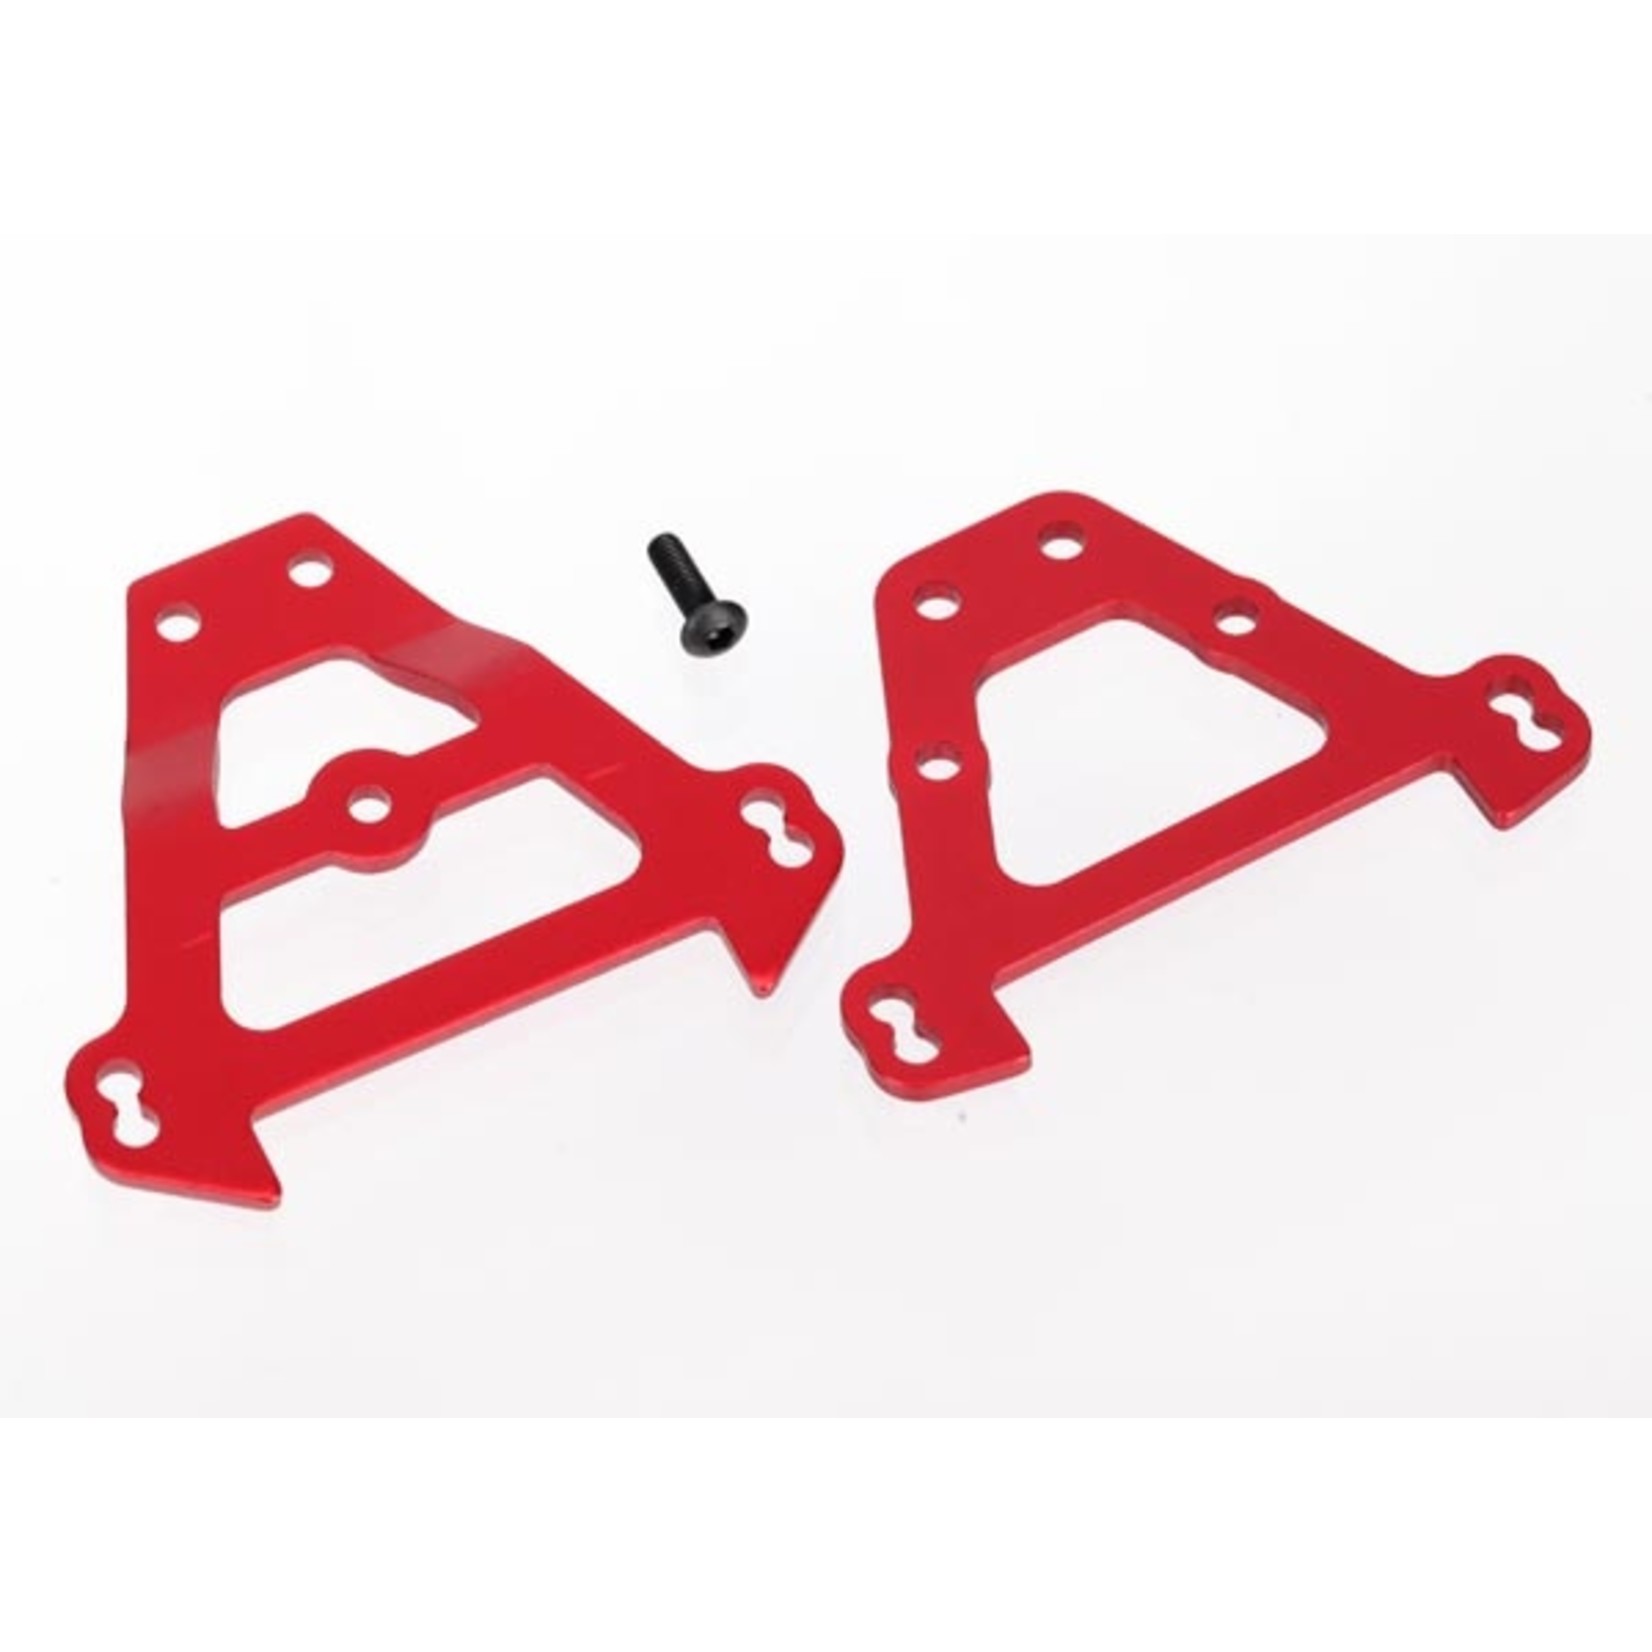 Traxxas 5323R - Bulkhead tie bars, front & rear (red-anodized a